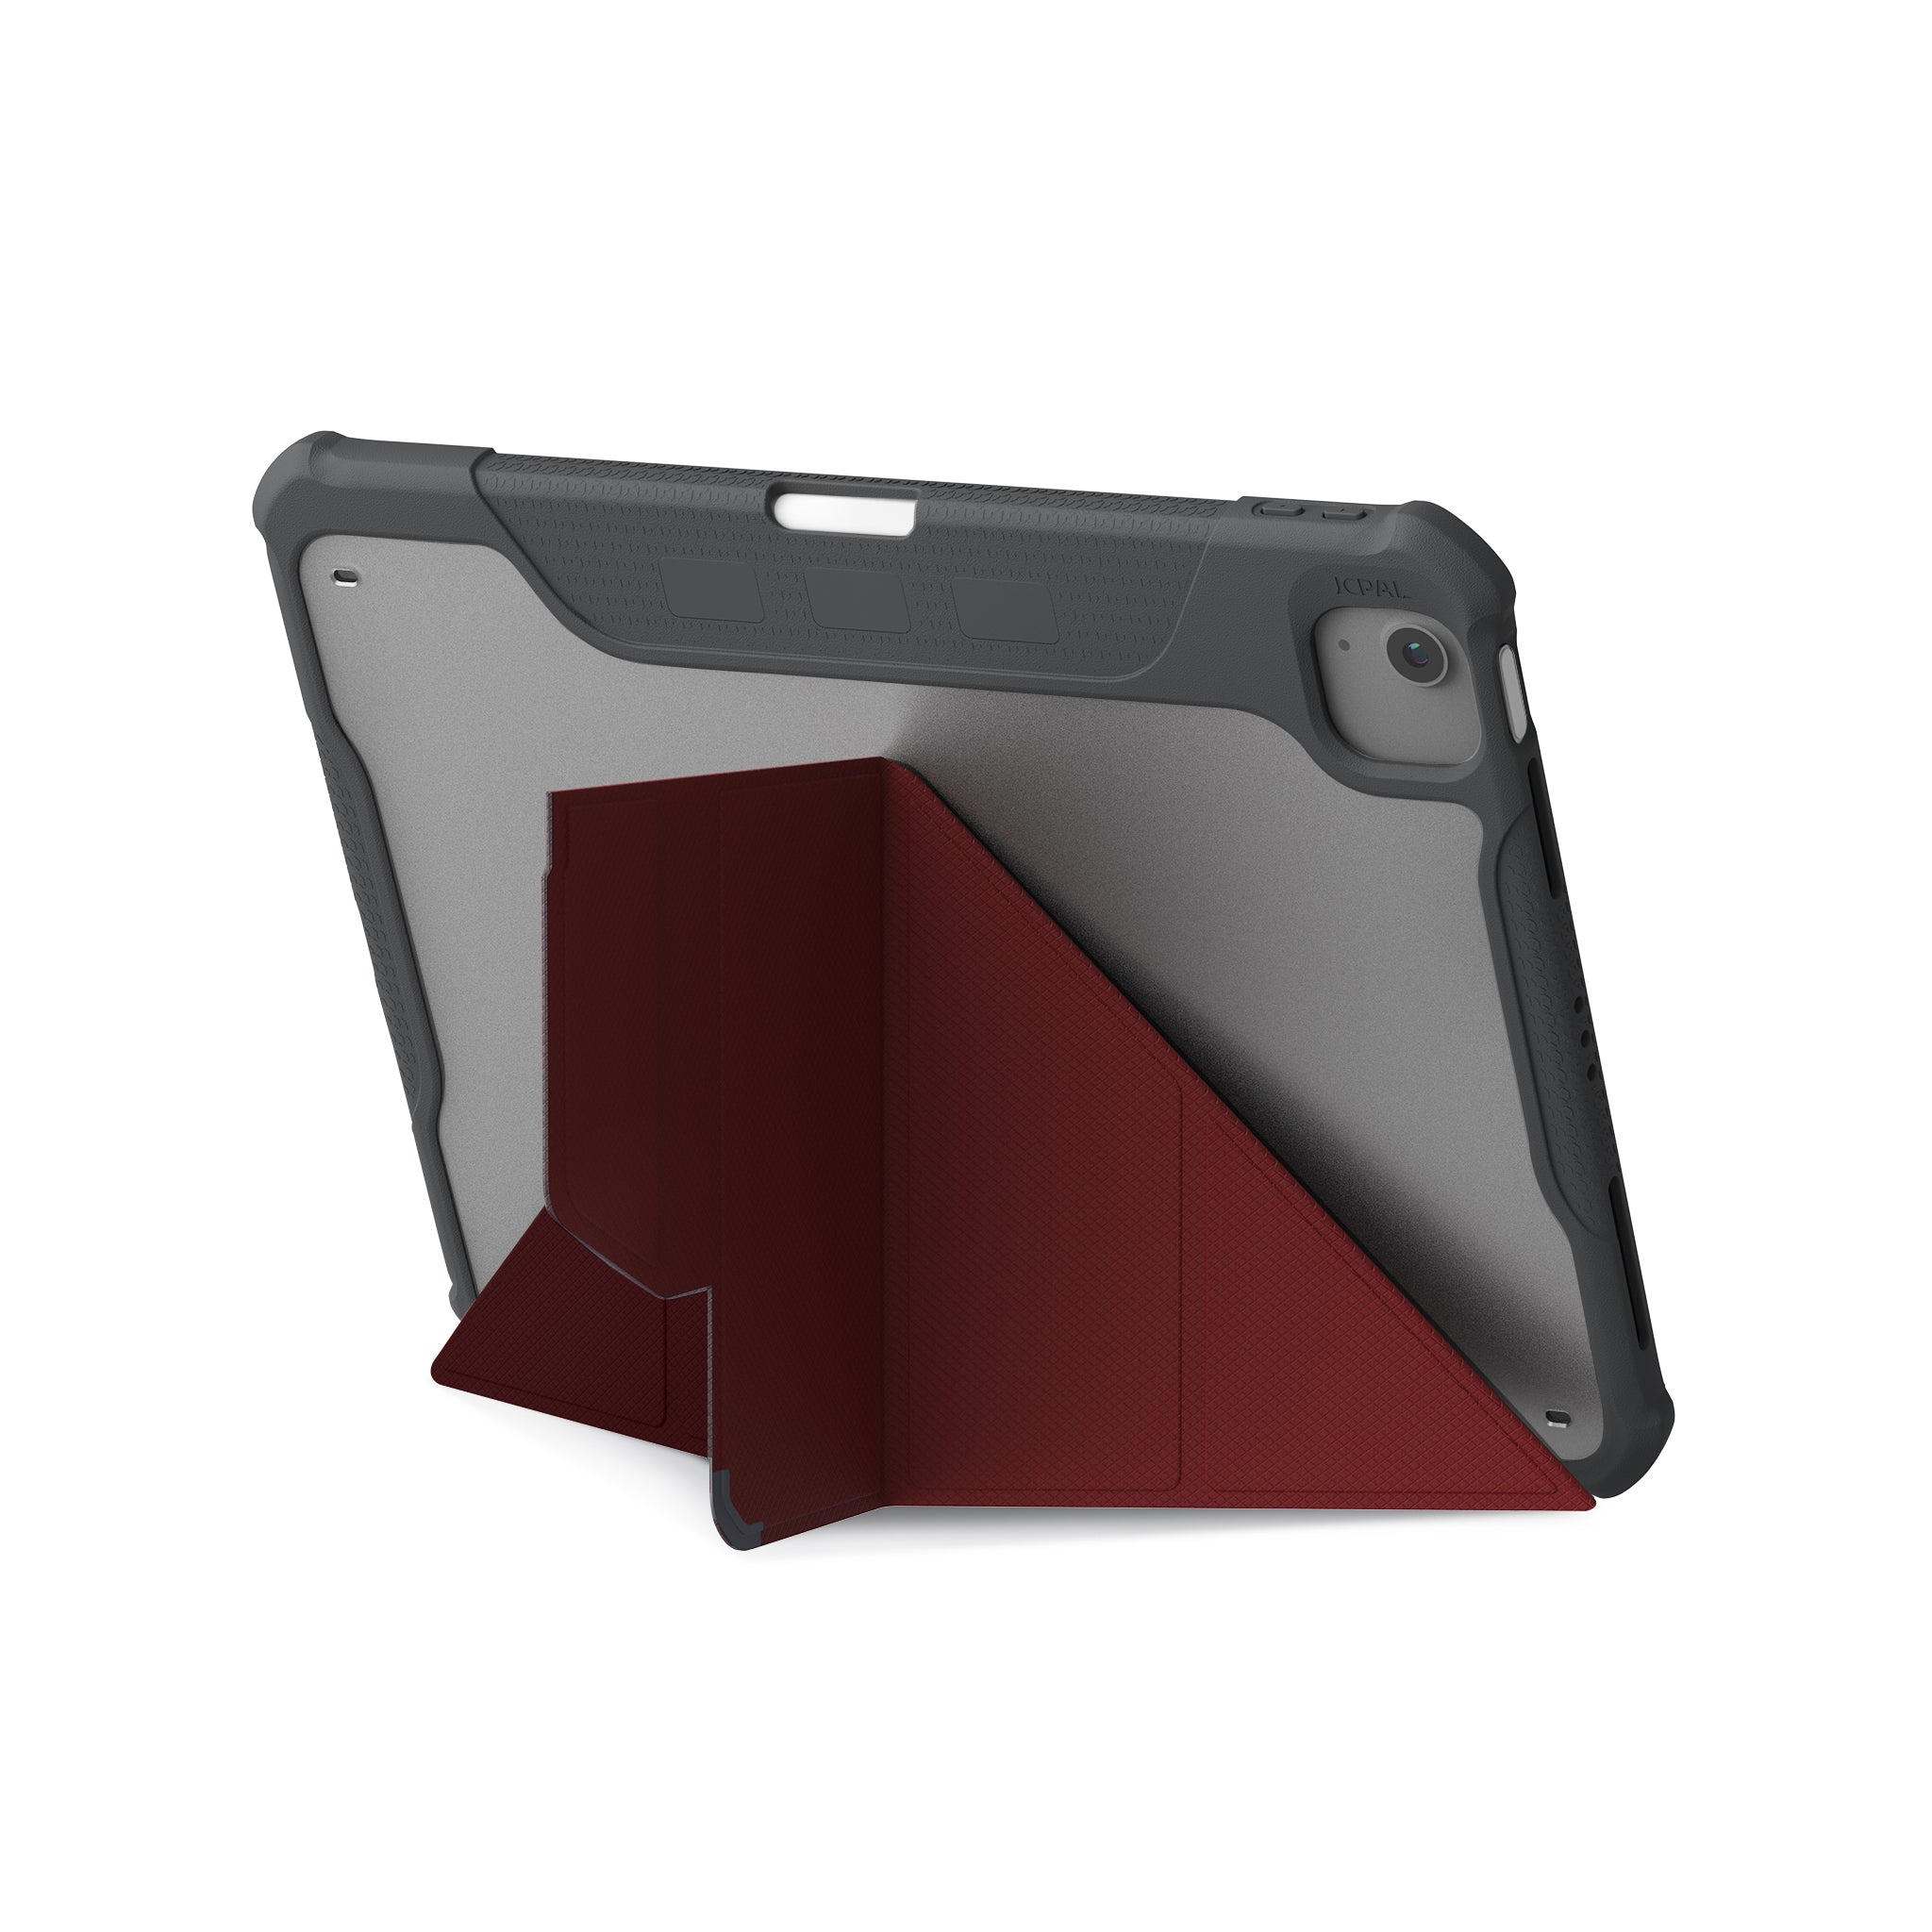 Origami protective case for 2020 iPad Air 10.9 4th gen